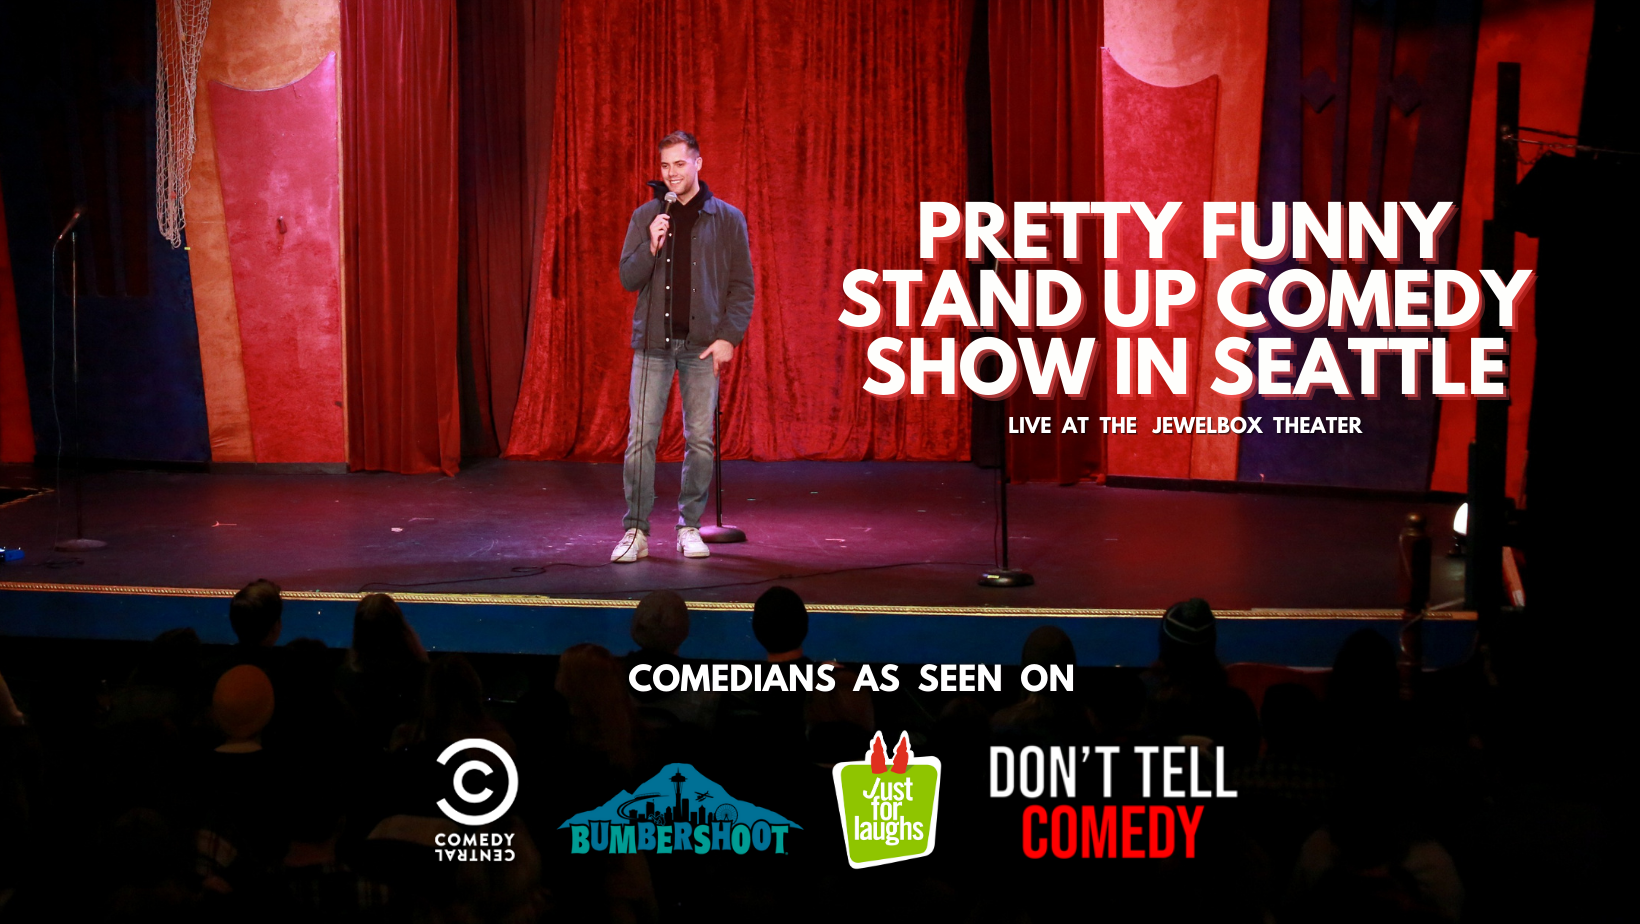 Pretty Funny Stand Up Comedy Show in Seattle - The Rendezvous